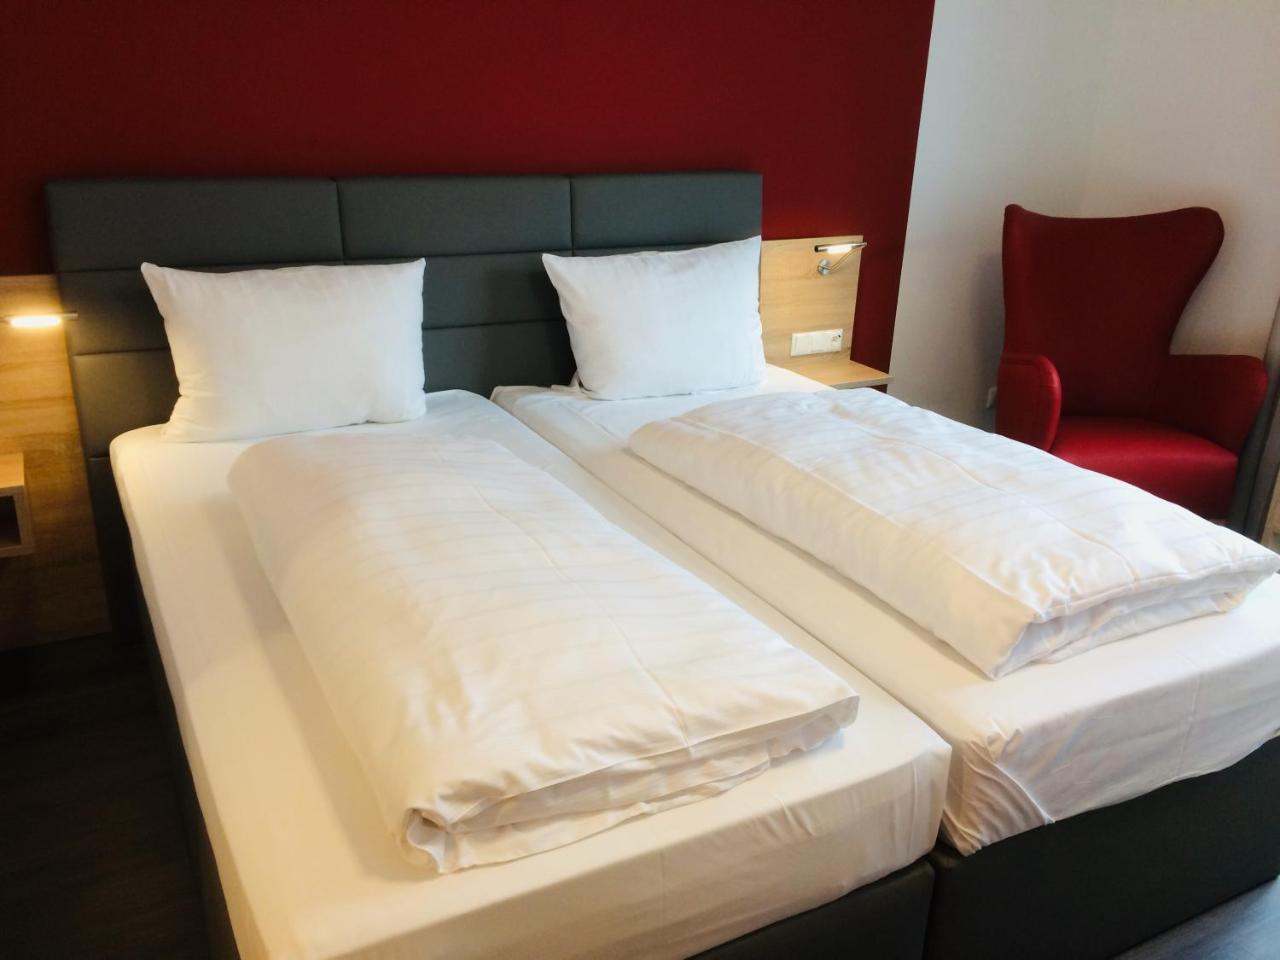 Adesso Hotel Gottingen - Pay At Property On Arrival-Ihr Automatenhotel In 괴팅겐 외부 사진